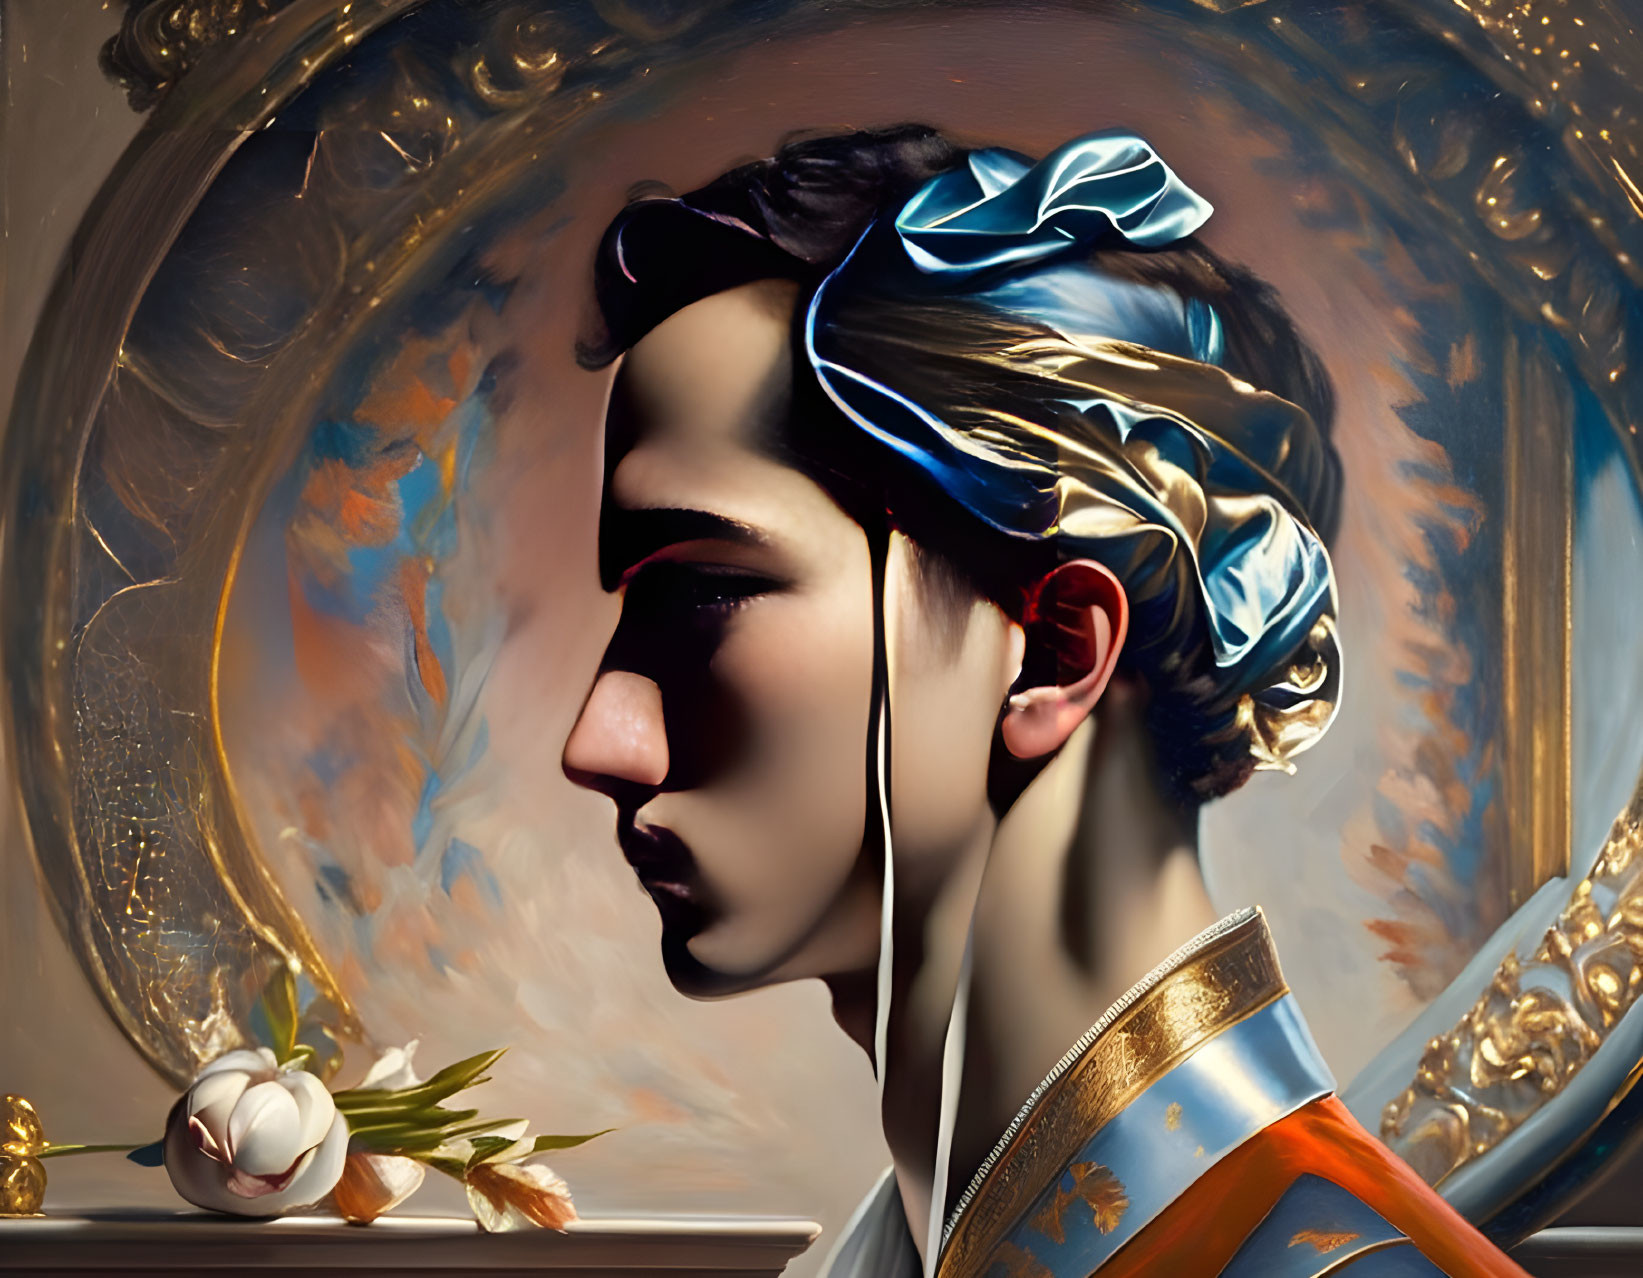 Blue headband person in elegant attire with classic painting backdrop